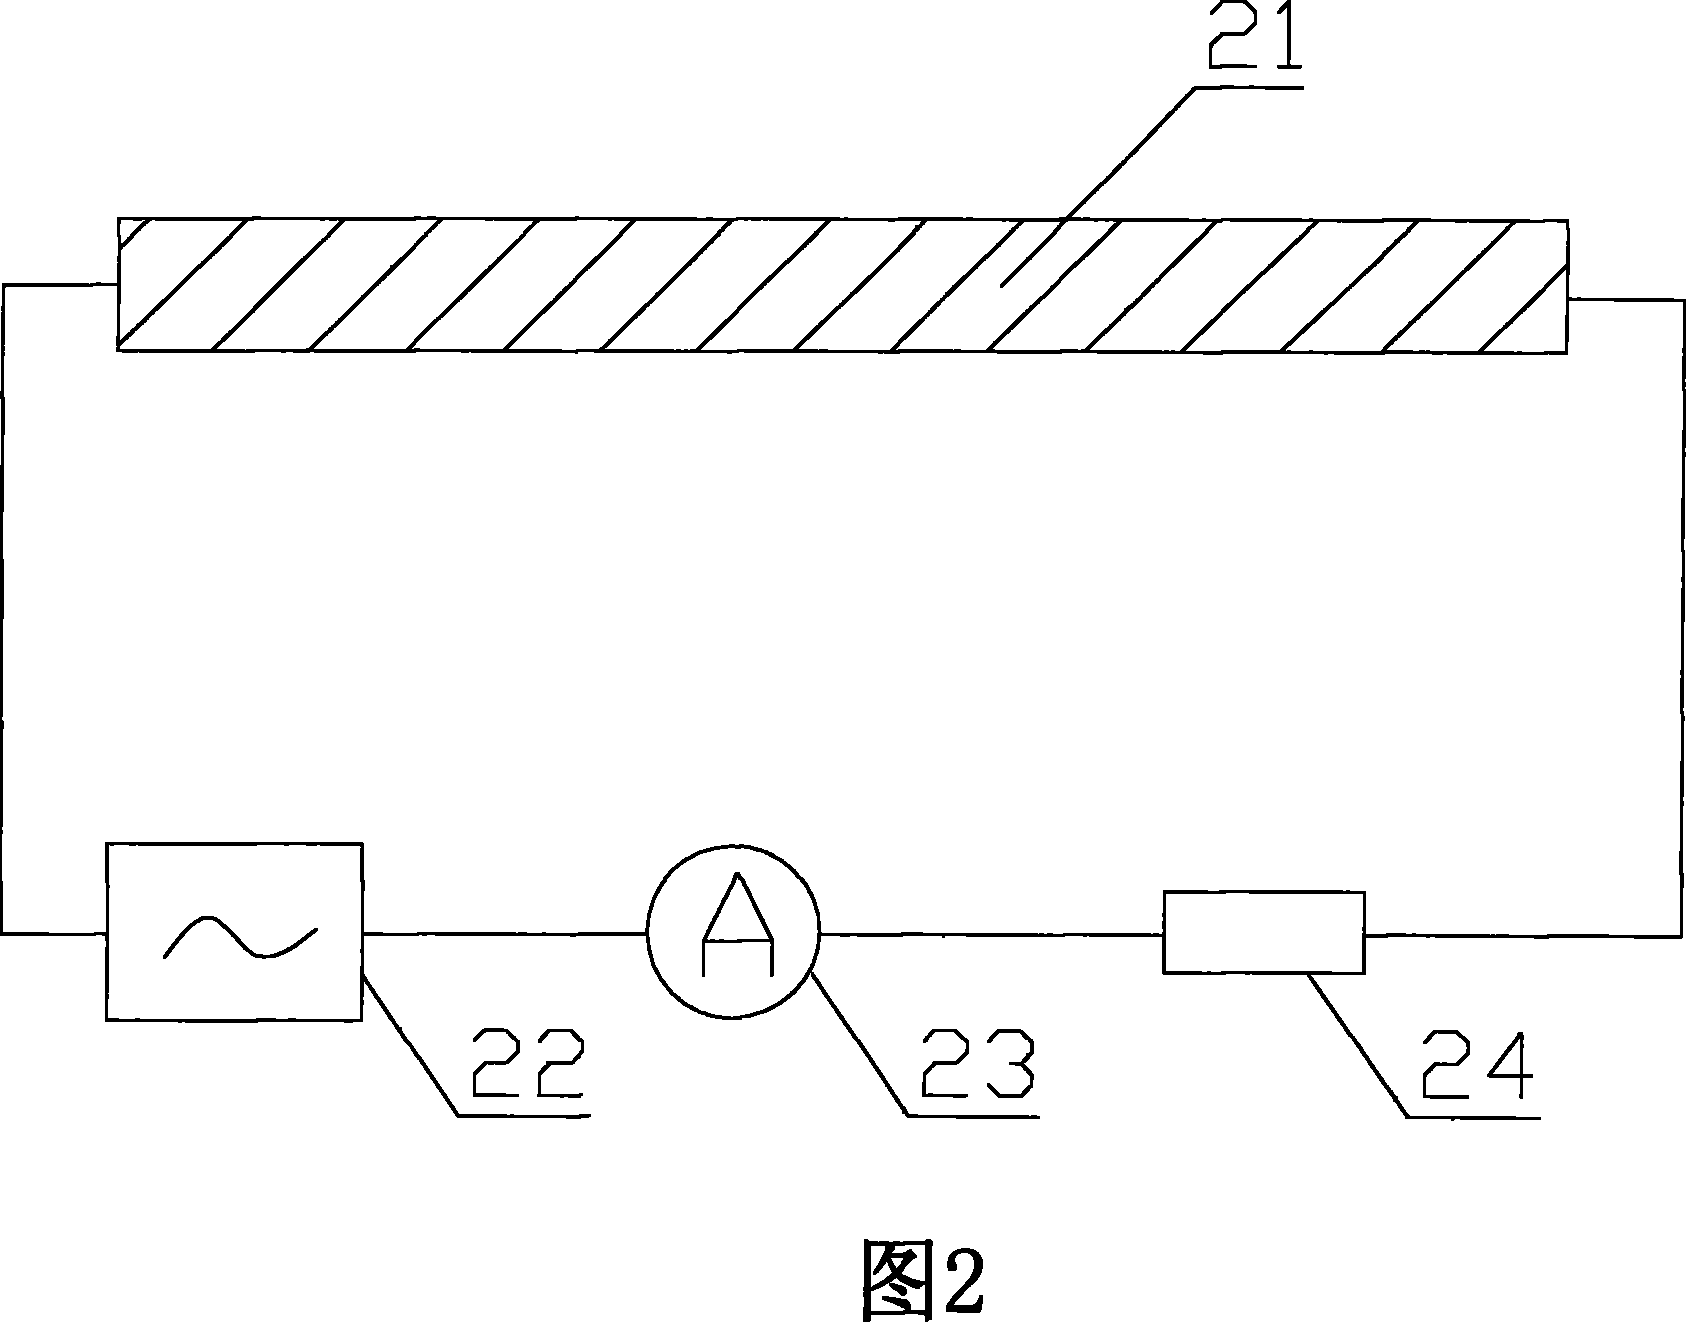 Processing method of power cable